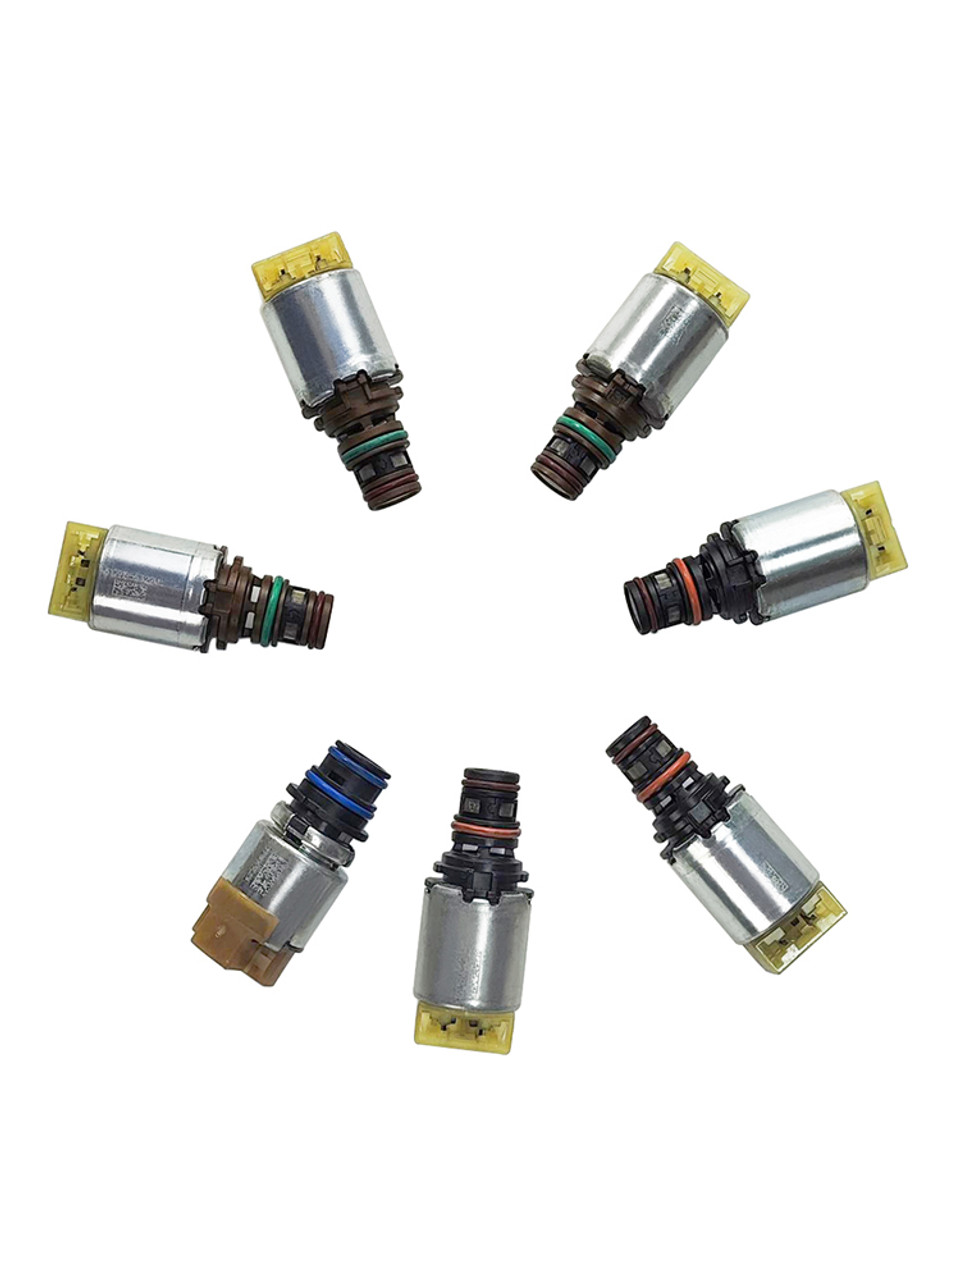 7PCS 6R80 Transmission Valve Body Solenoid Kit For Ford F-150/Expedition